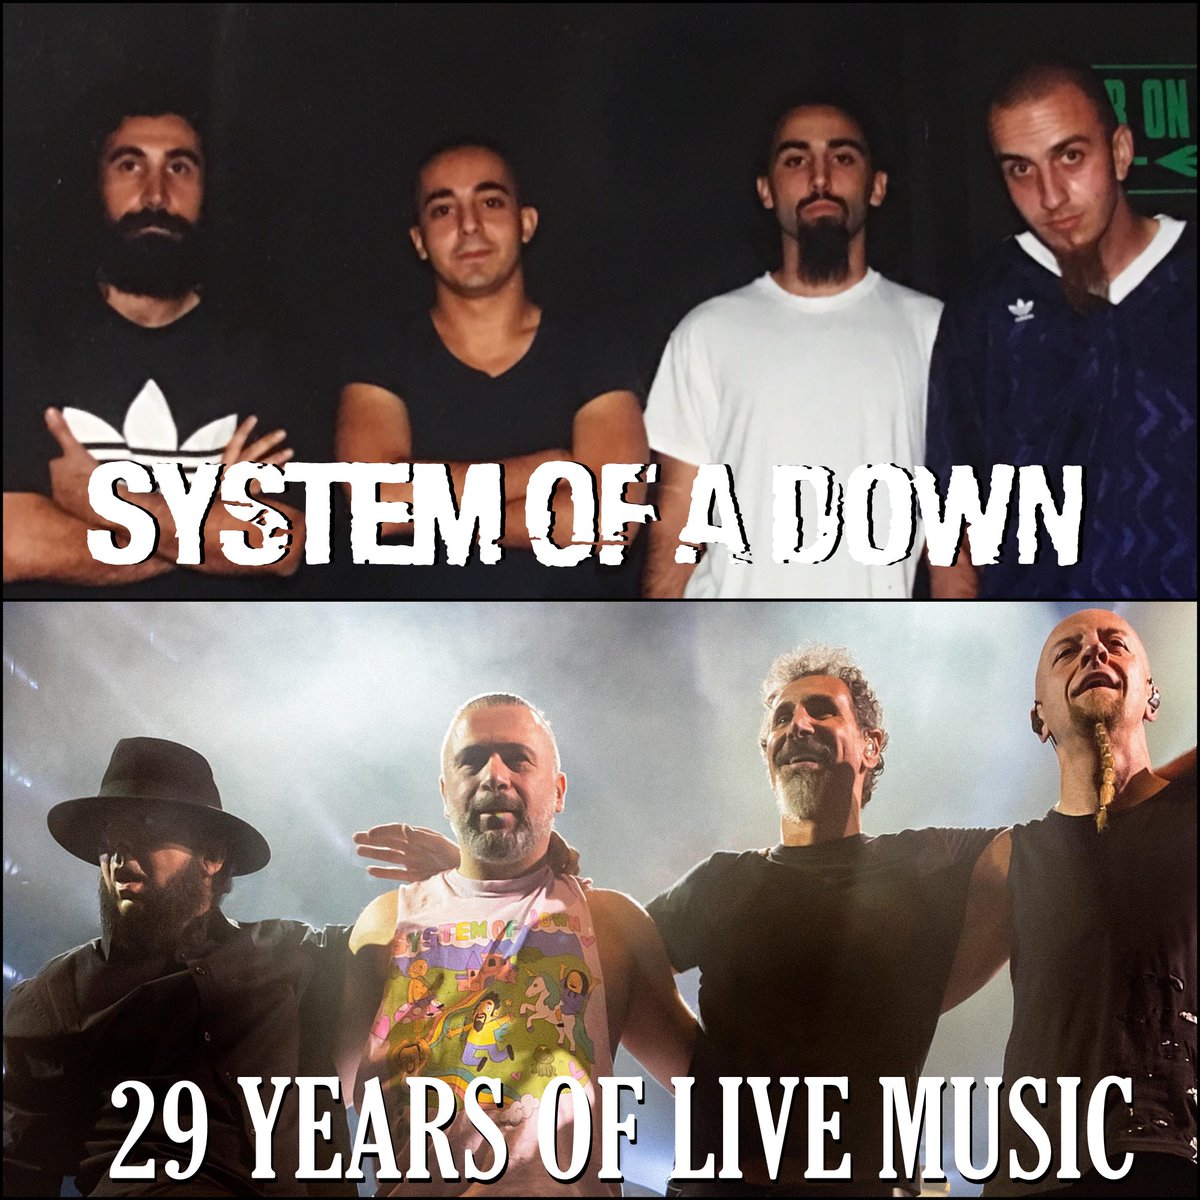 System Of A Down played their first show at The Roxy Theatre in West Hollywood exactly 29 years ago today on May 28, 1995!

Photos by Rudy and Greg Watermann.

#SystemOfADown #SOAD #DaronMalakian #SerjTankian #ShavoOdadjian #JohnDolmayan #OntronikKhachaturian